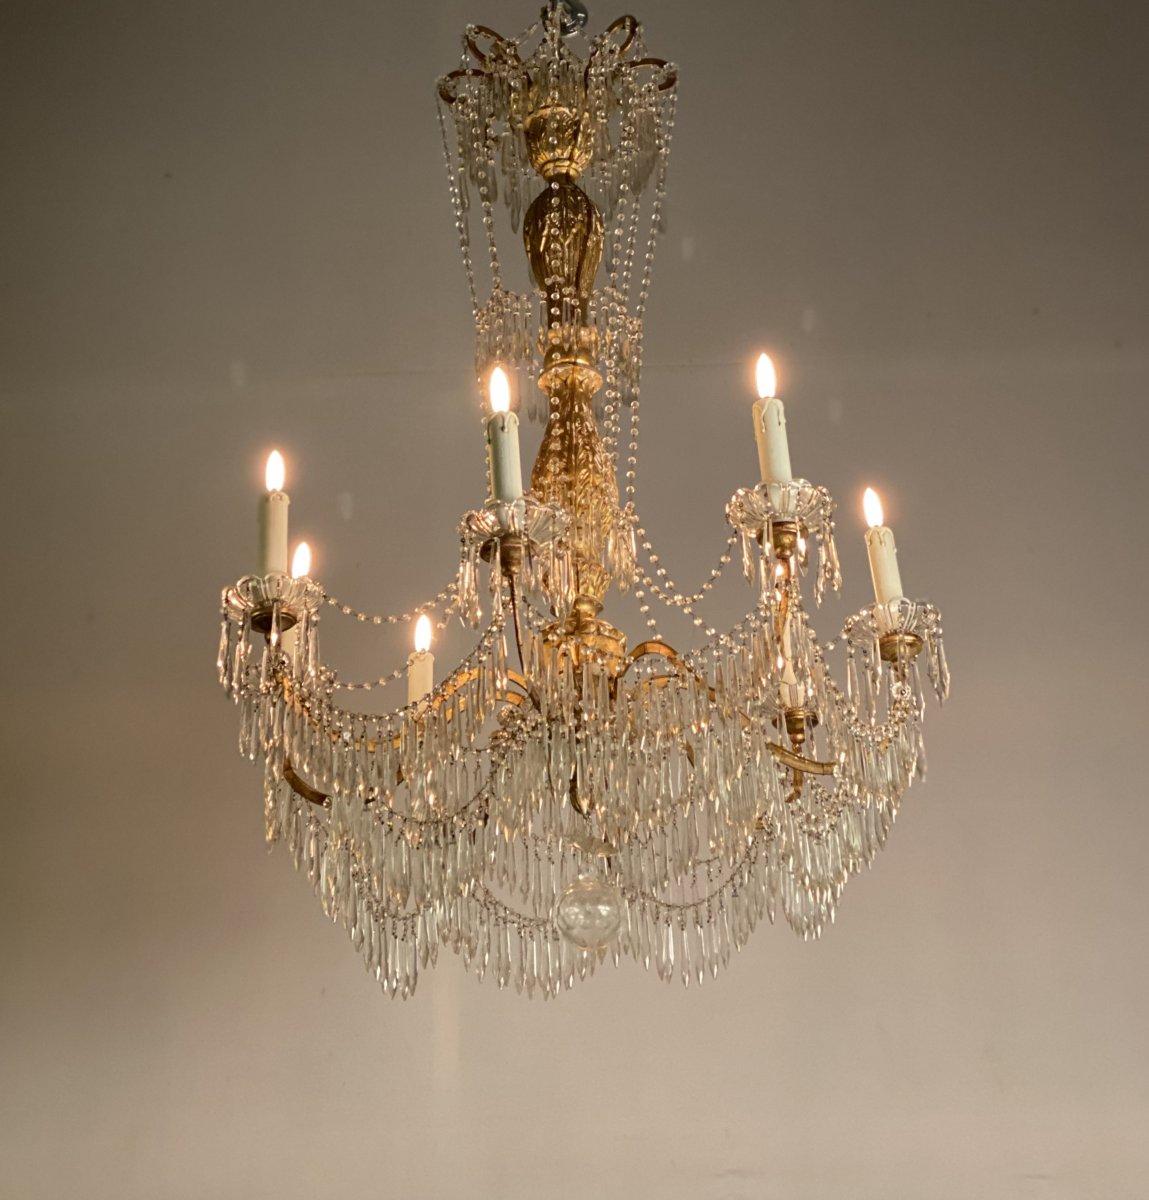 Chandelier 8 Arms of Light, Tassels and Golden Wood, Italy, Early 20th Century 4